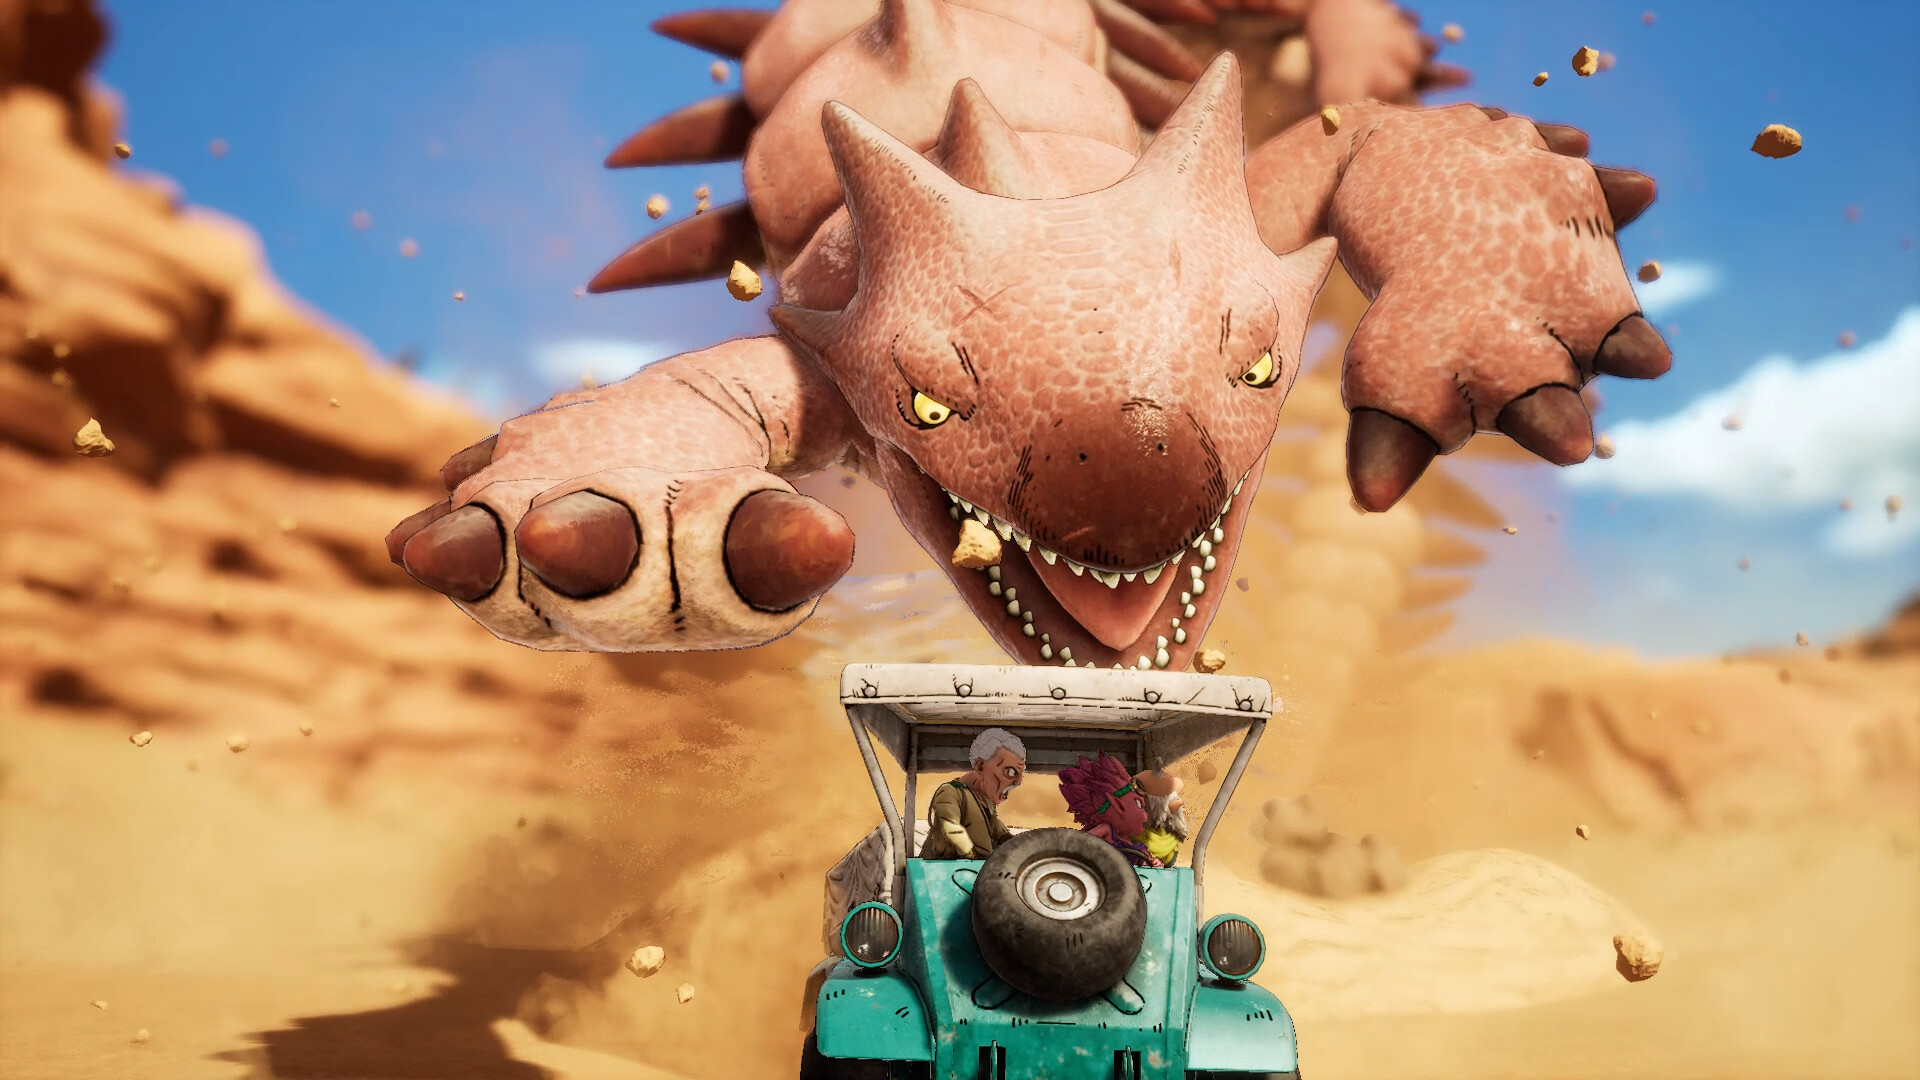 A sand creature jumps at a jeep in Sand Land.